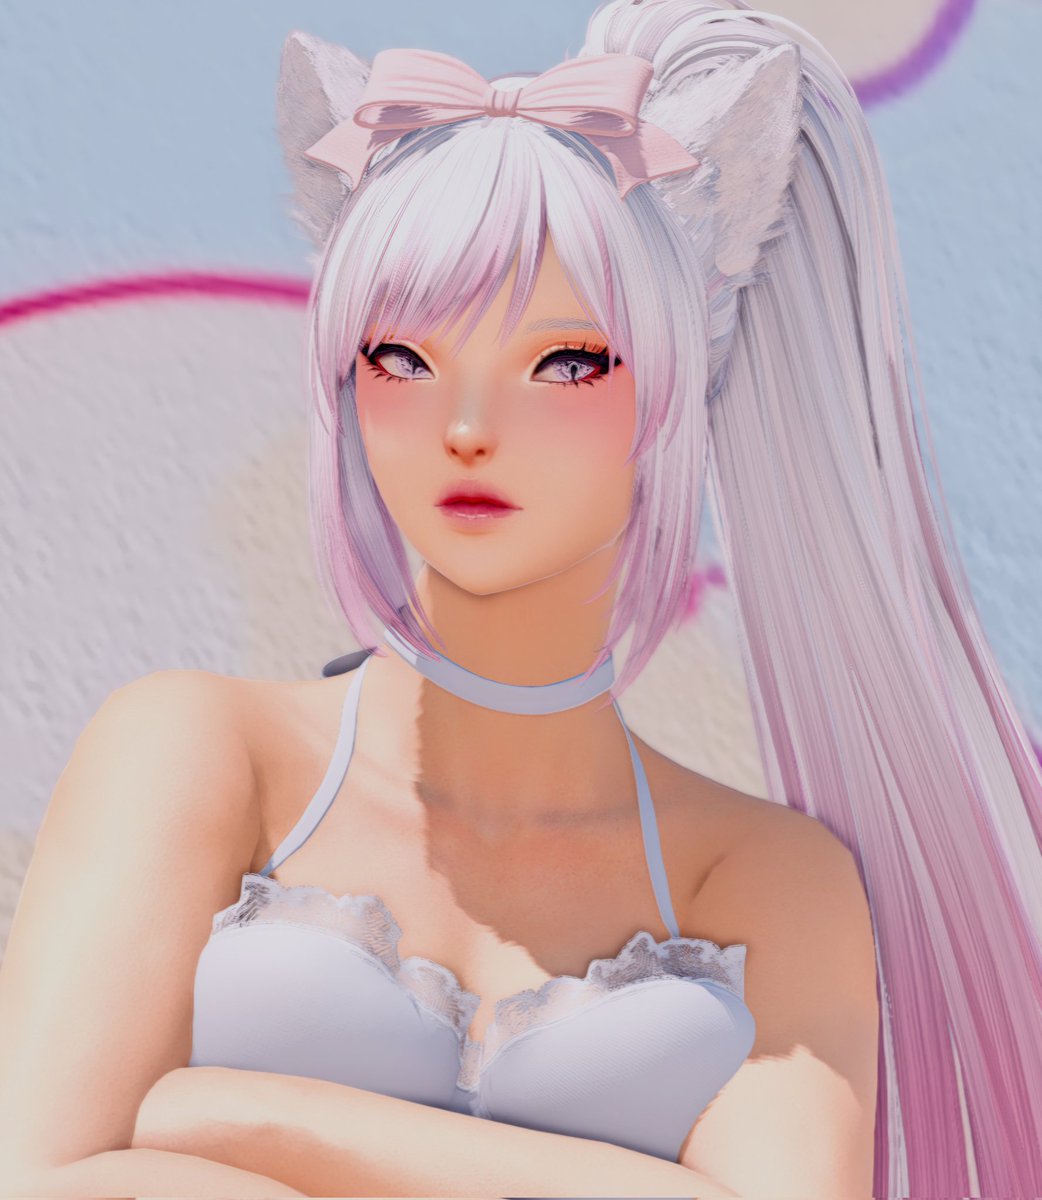 Did someone say swimsuit session?~ ♡♡

#ffxivmiqote 
#ffxivgposer 
#FFXIVSCREENSHOTS